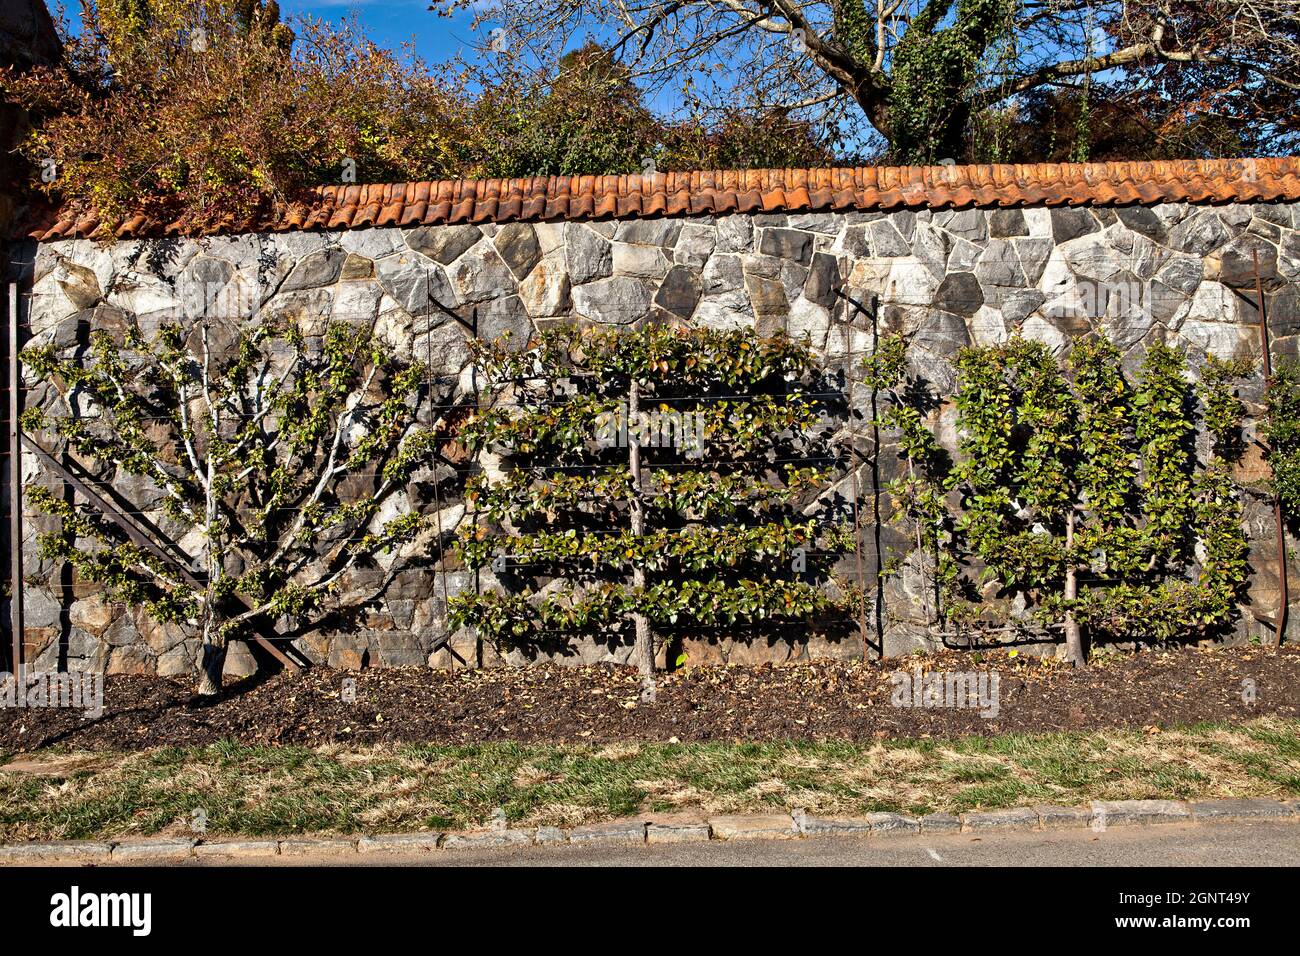 Espaliered fruit trees in the walled gardens of the Biltmore Estate during autumn in Asheville, North Carolina. The house, privately owned by the Vanderbilt family, is the largest home in America with over 250 rooms. Stock Photo